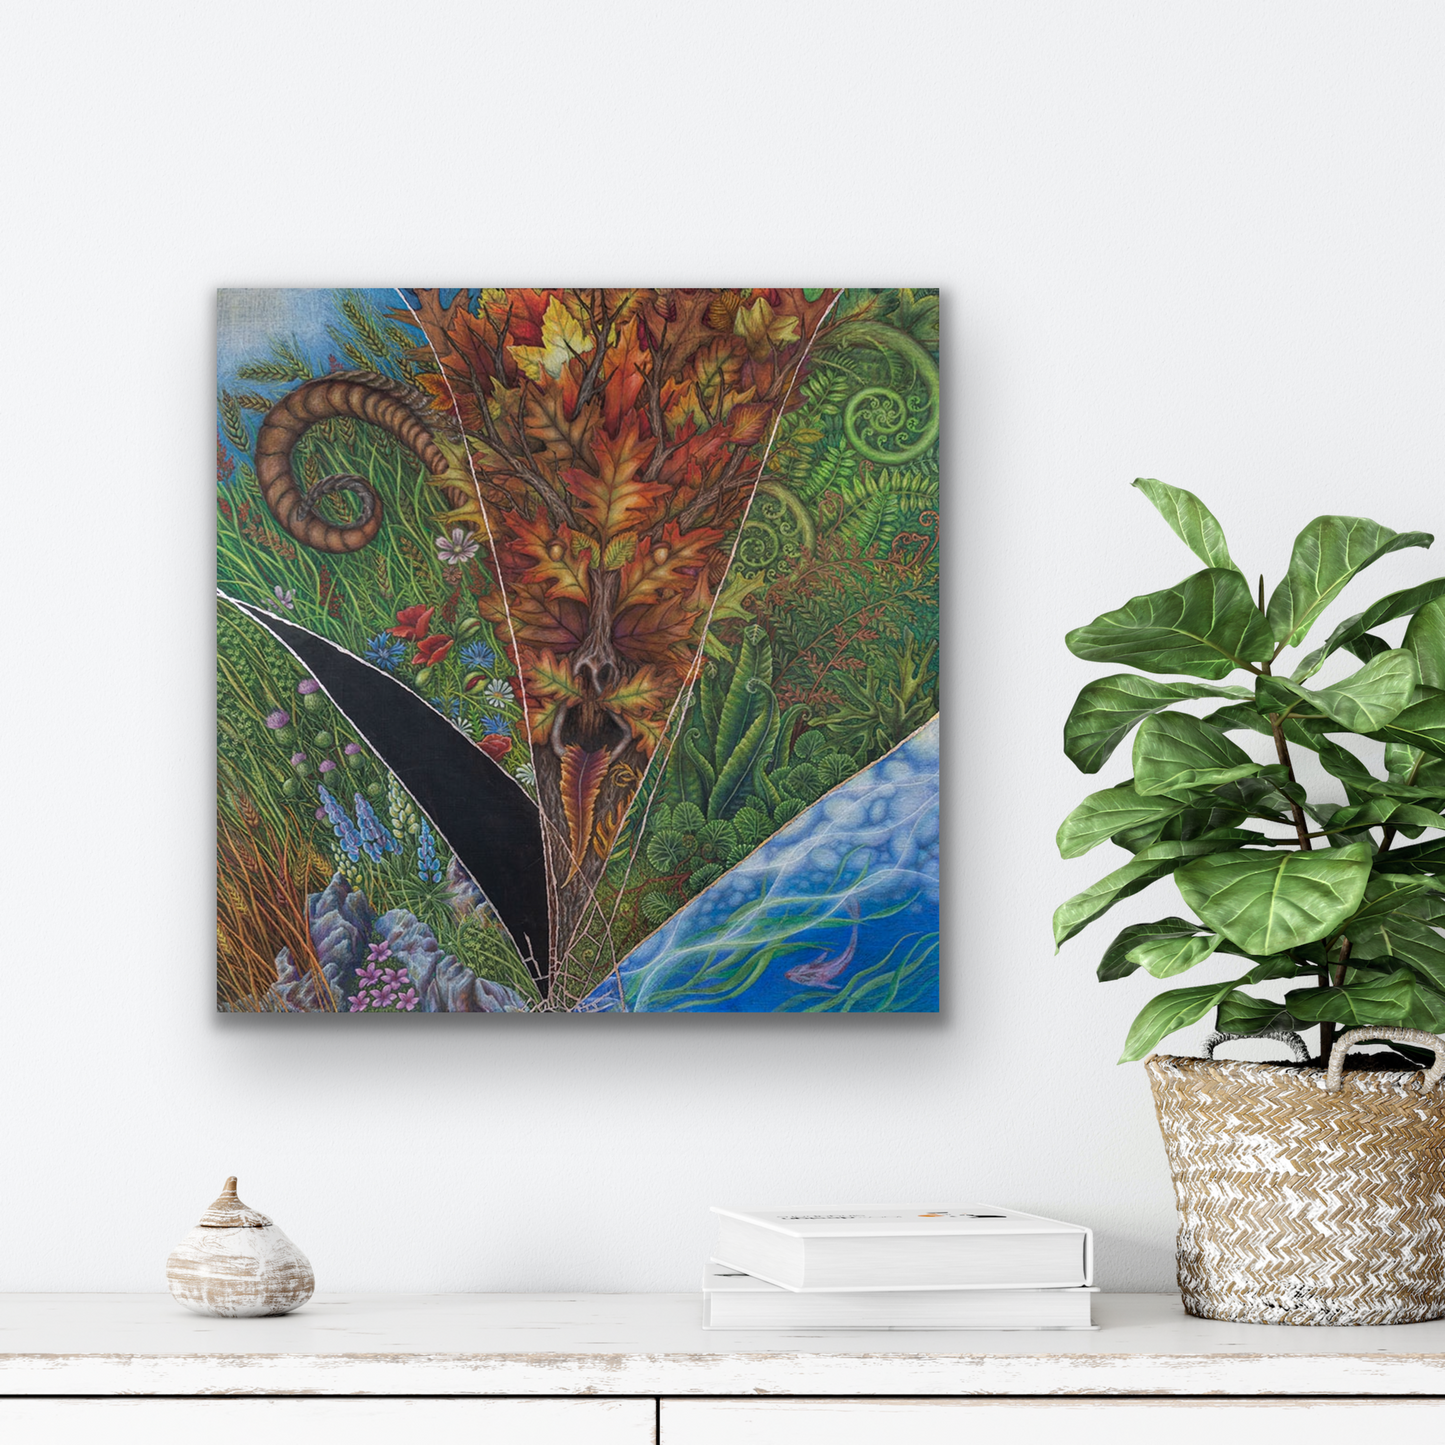 "Reclamation" art work will look great in your hallway, living room or dining room.